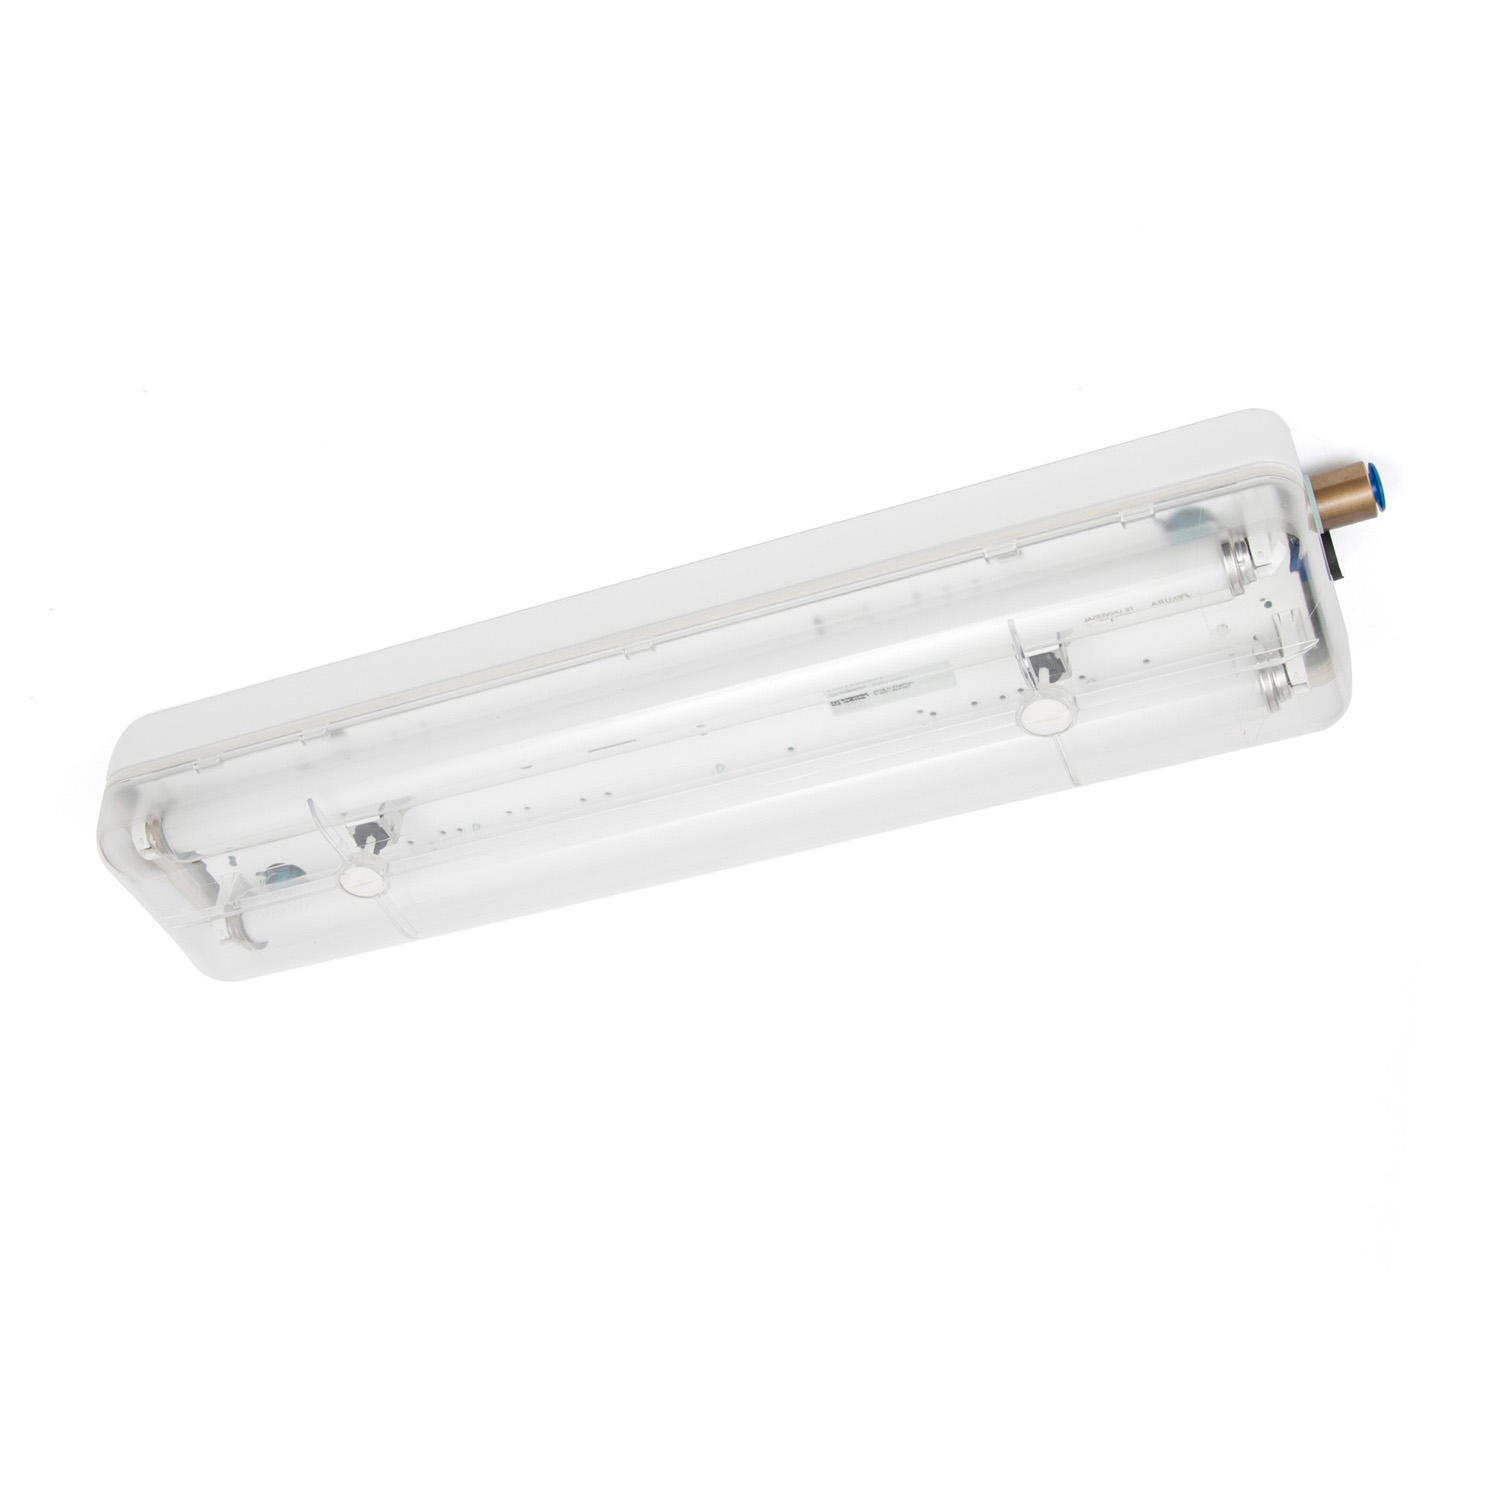 1891102201 Coldroom luminaire surface, 2X18W 230V 50Hz, IP67, incl.thermo tubes